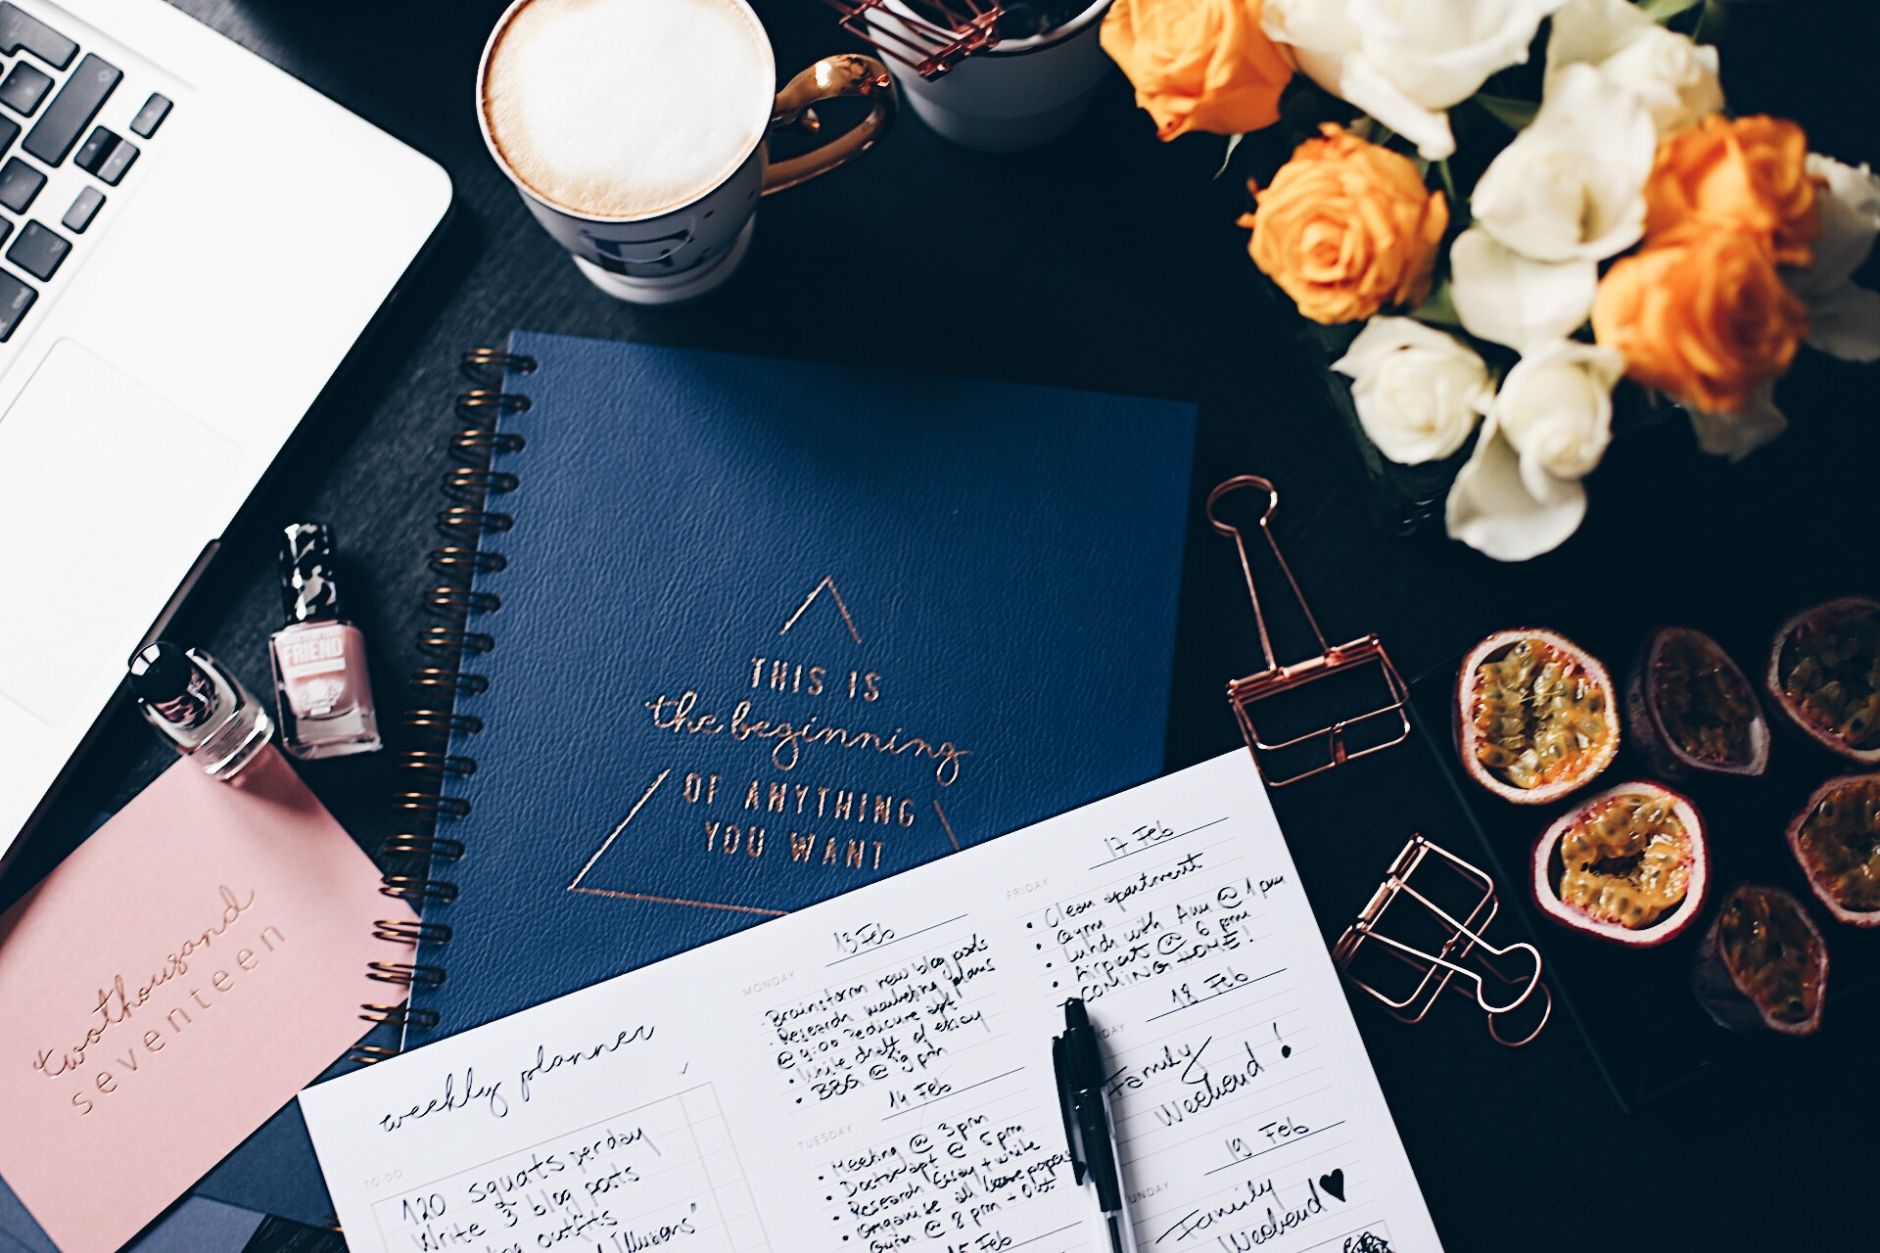 HOW TO BE PRODUCTIVE WITH A PLANNER